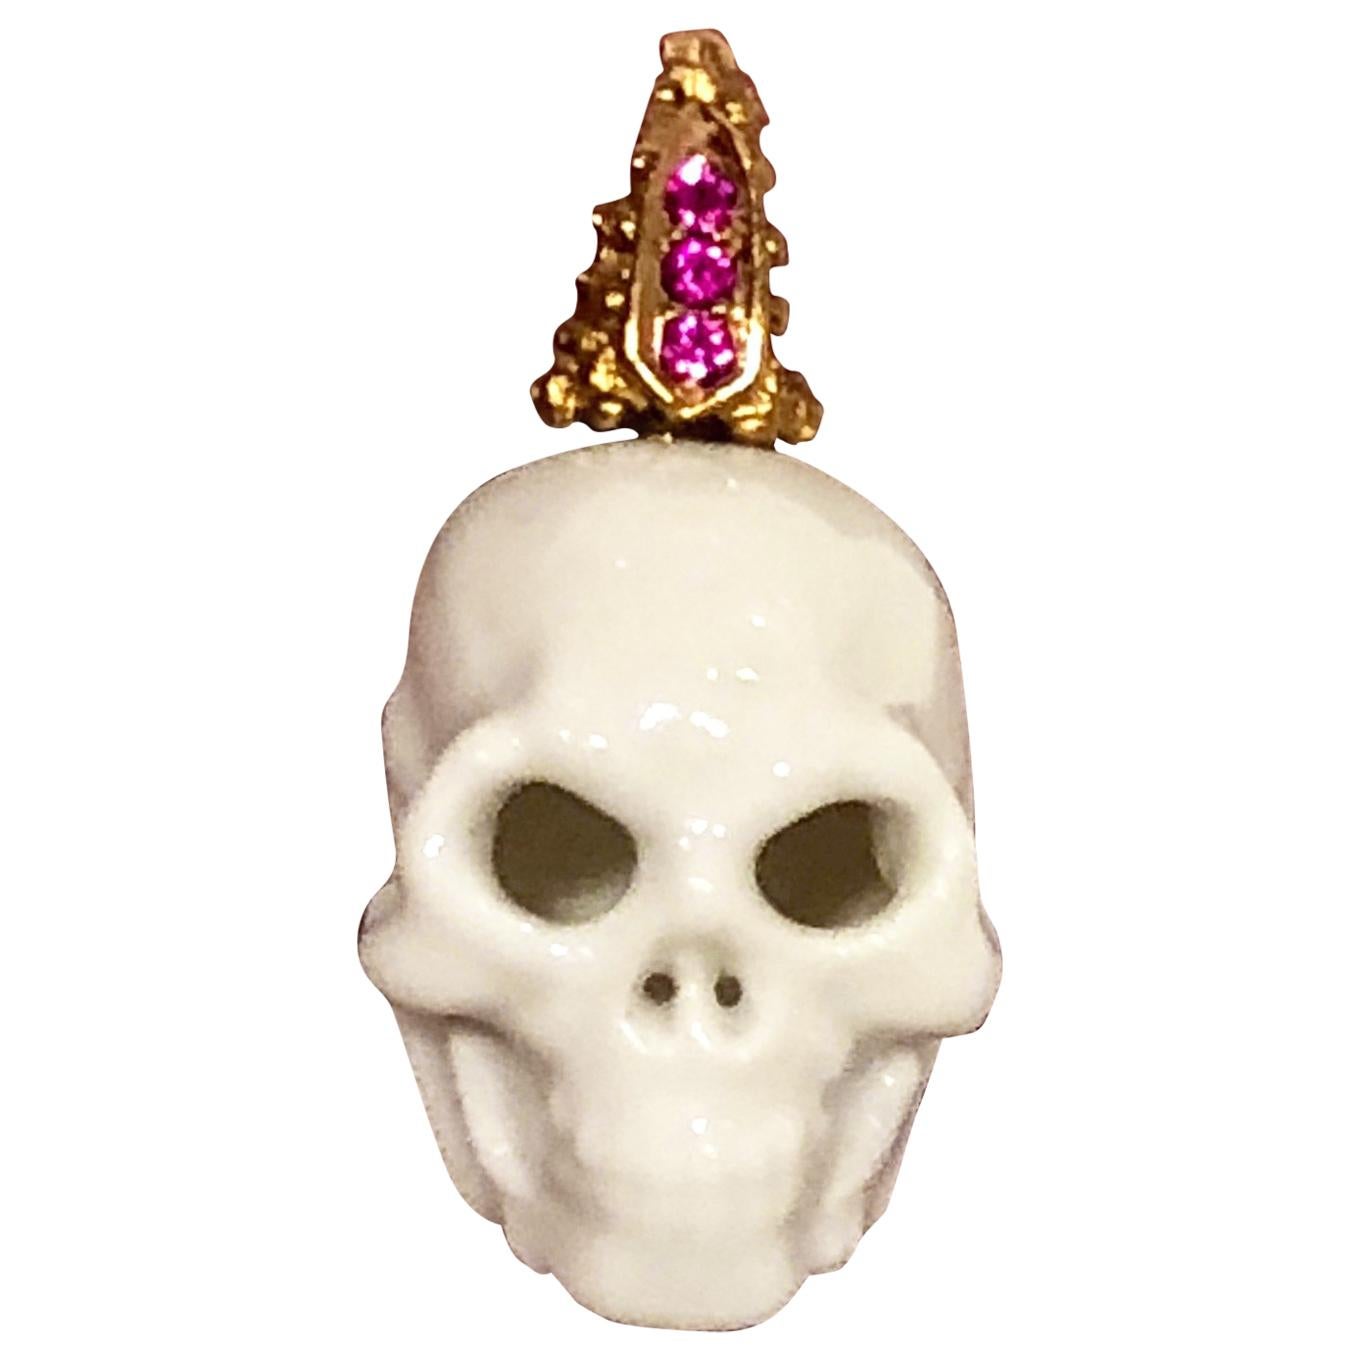 Limited Edition Rosenthal Porcelain Skull Pendant with 18k gold and set Rubies